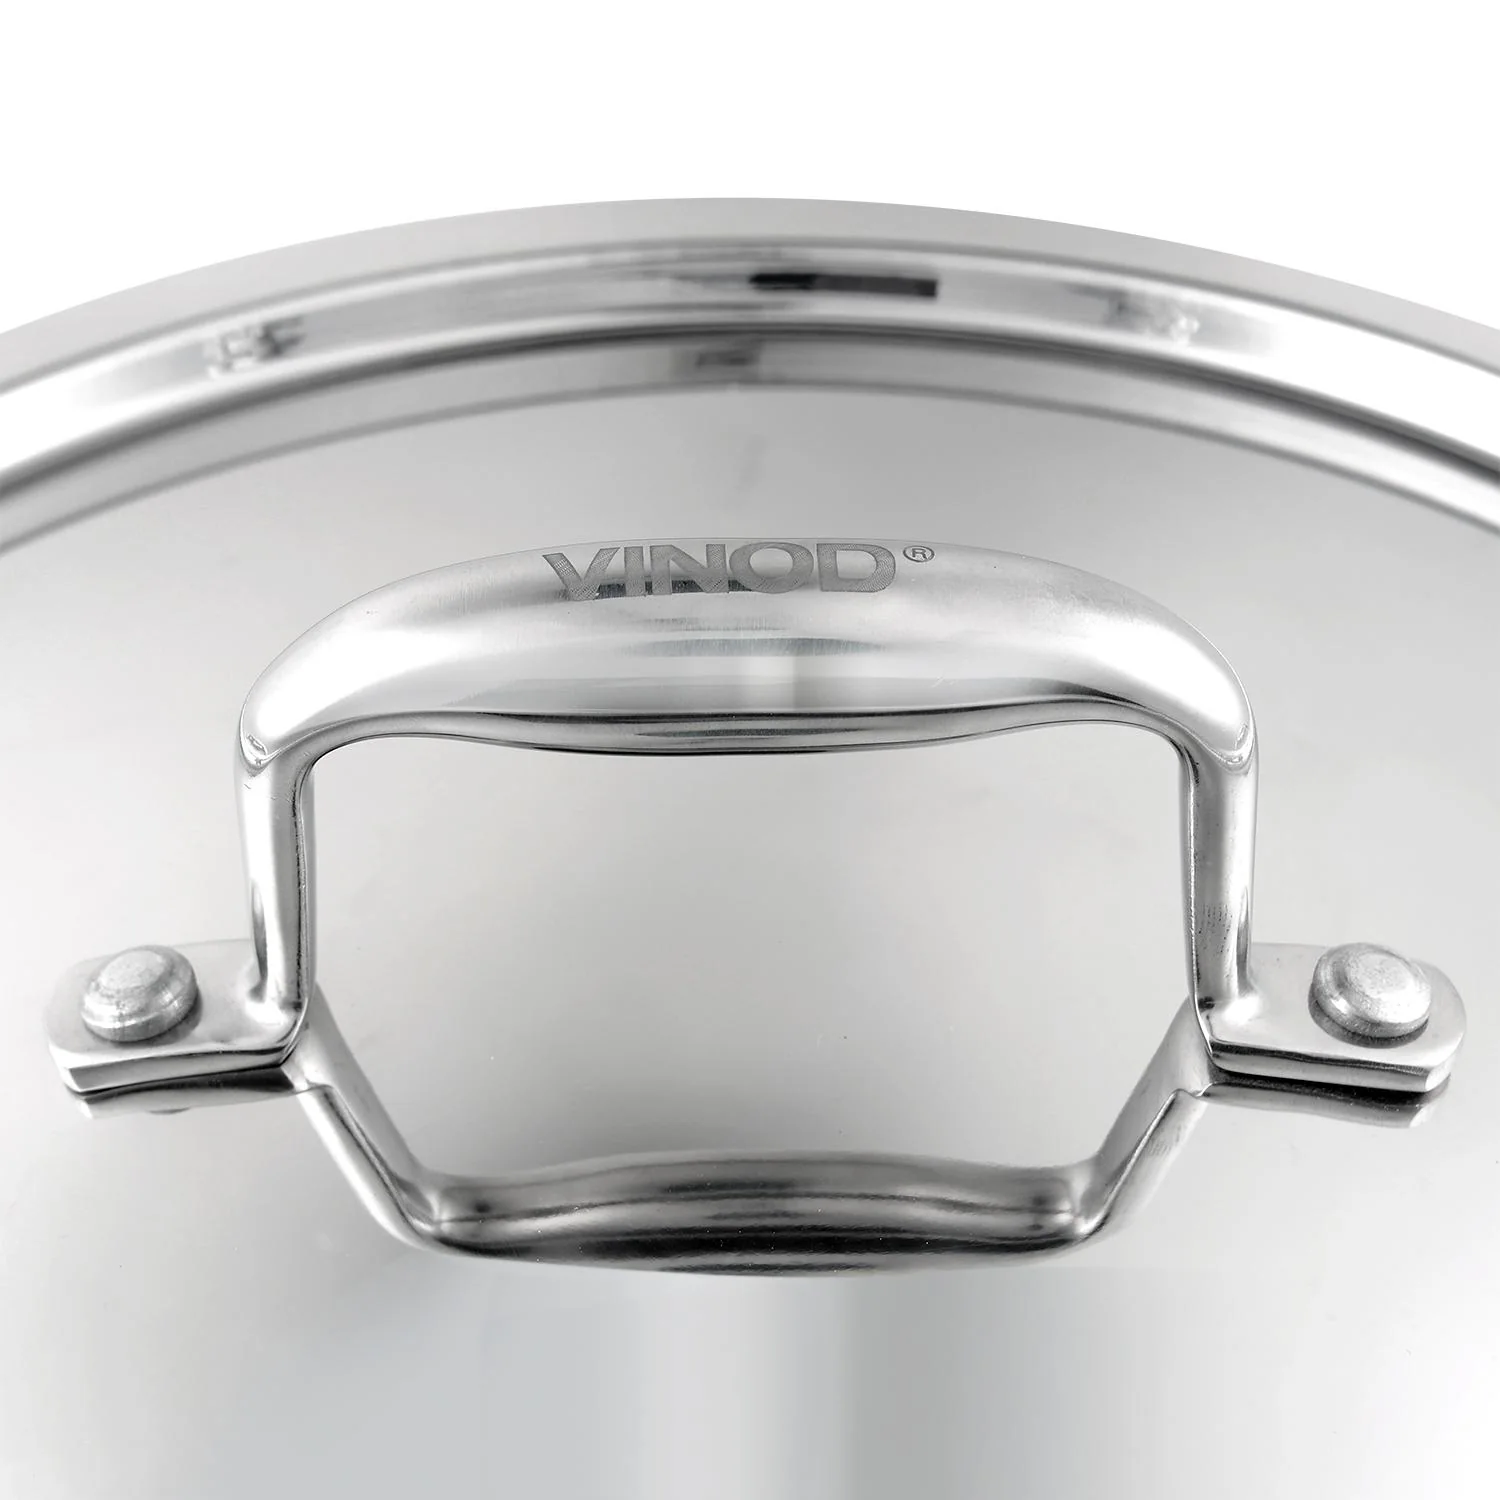 Details about   Vinod Platinum Triply Stainless Steel Tope with Lid Free Shipping 